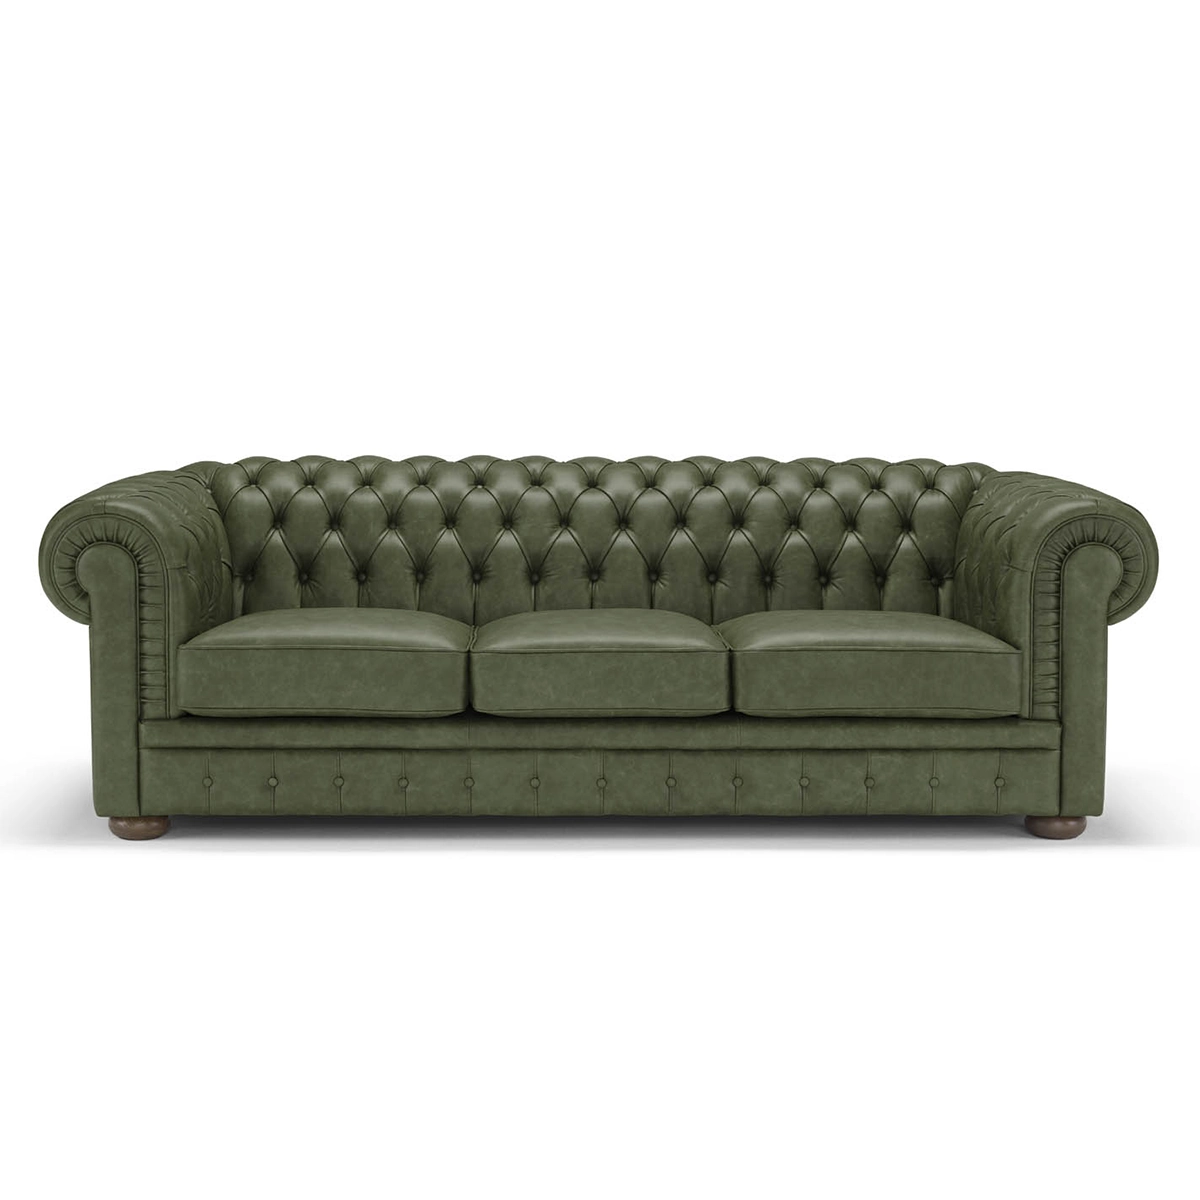 Three-seater leather Chesterfield sofa